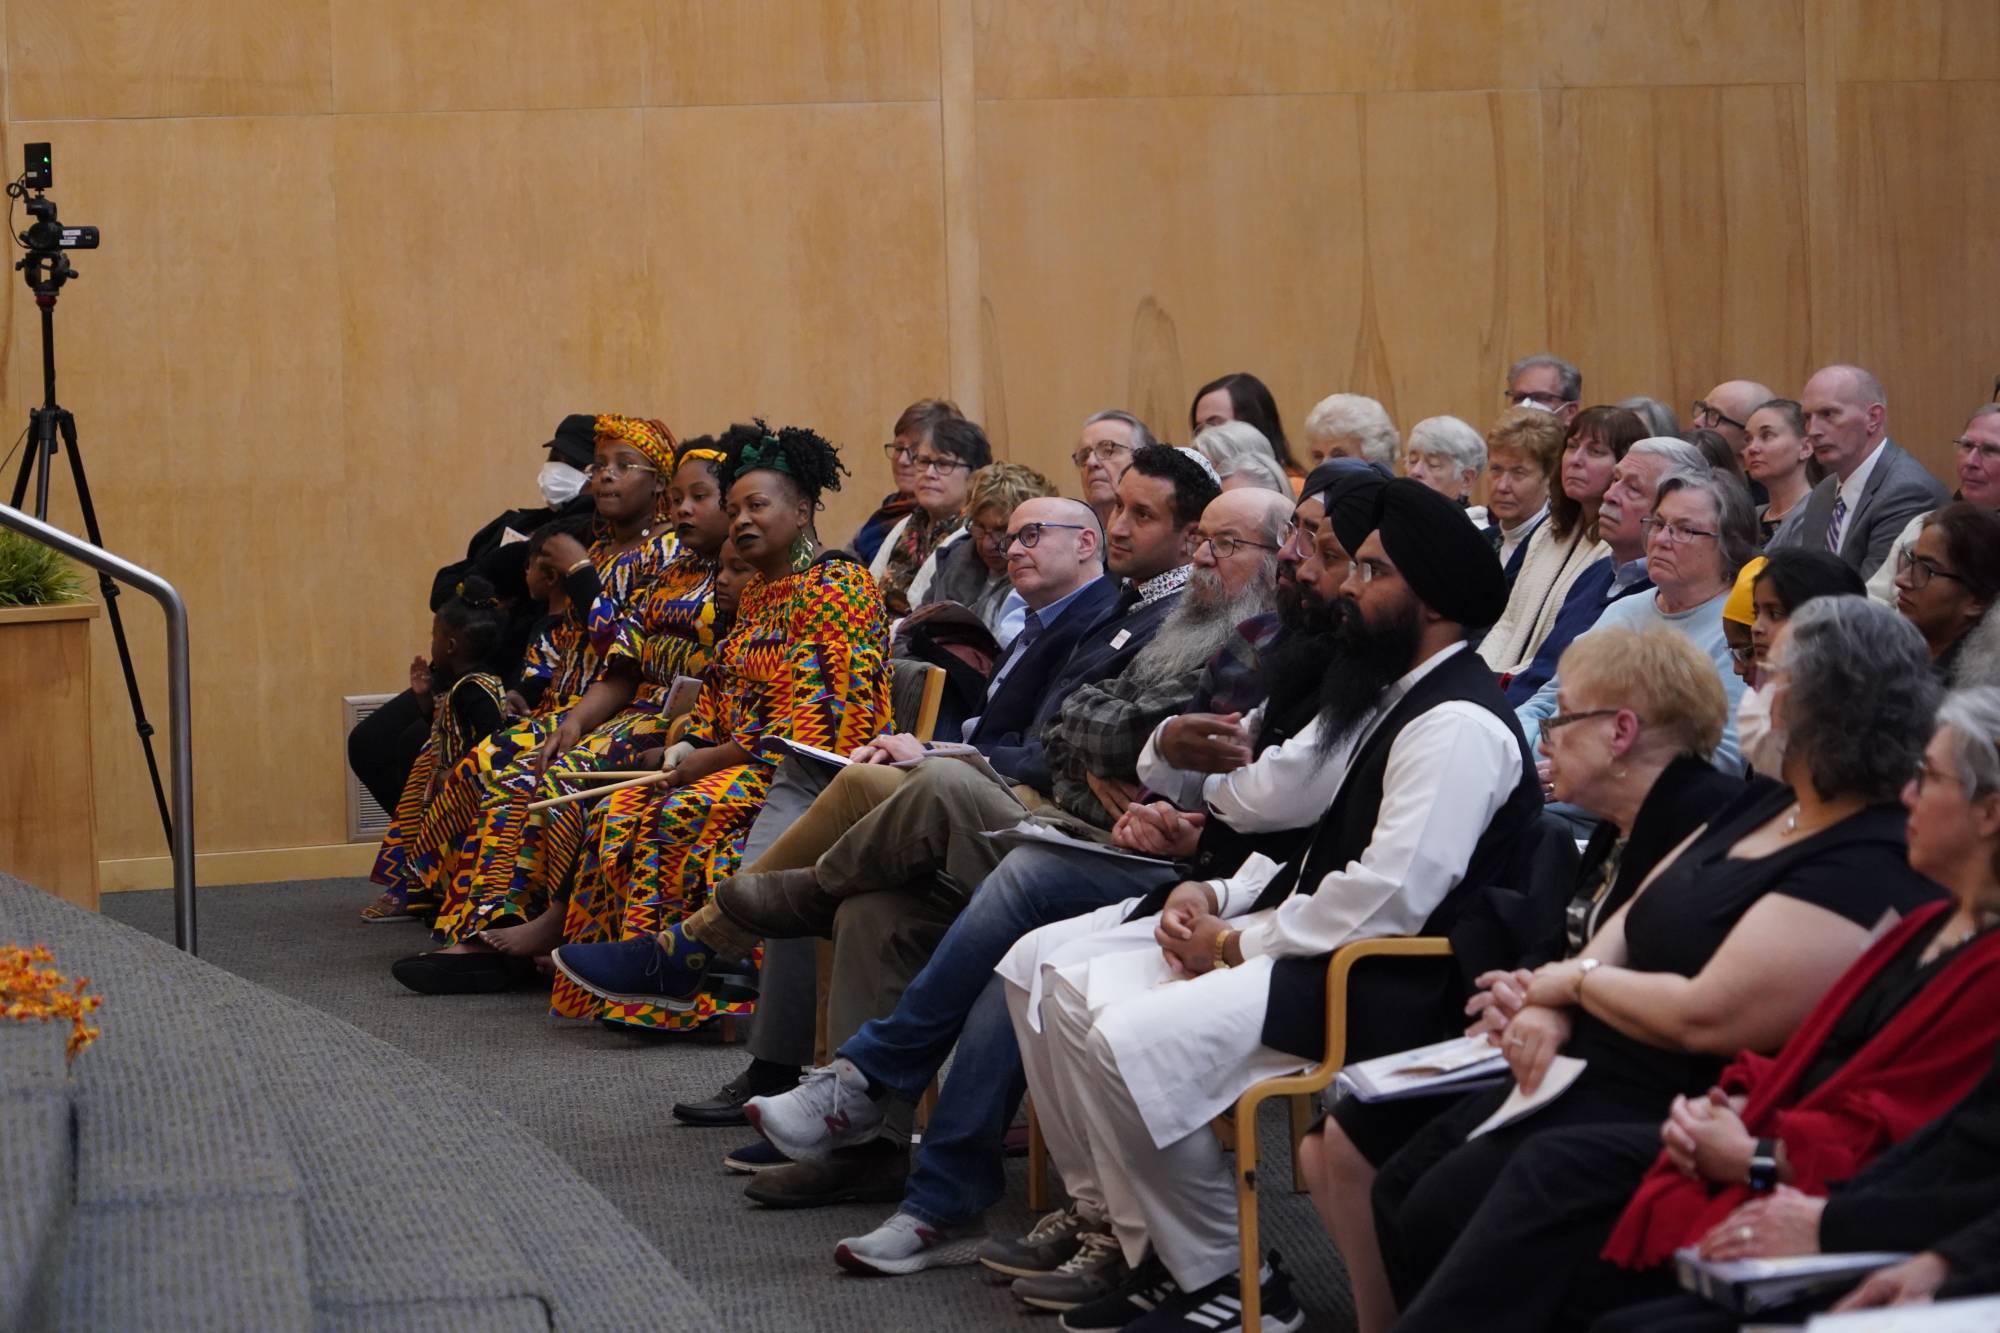 Speakers at 23rd Annual Interfaith Thanksgiving